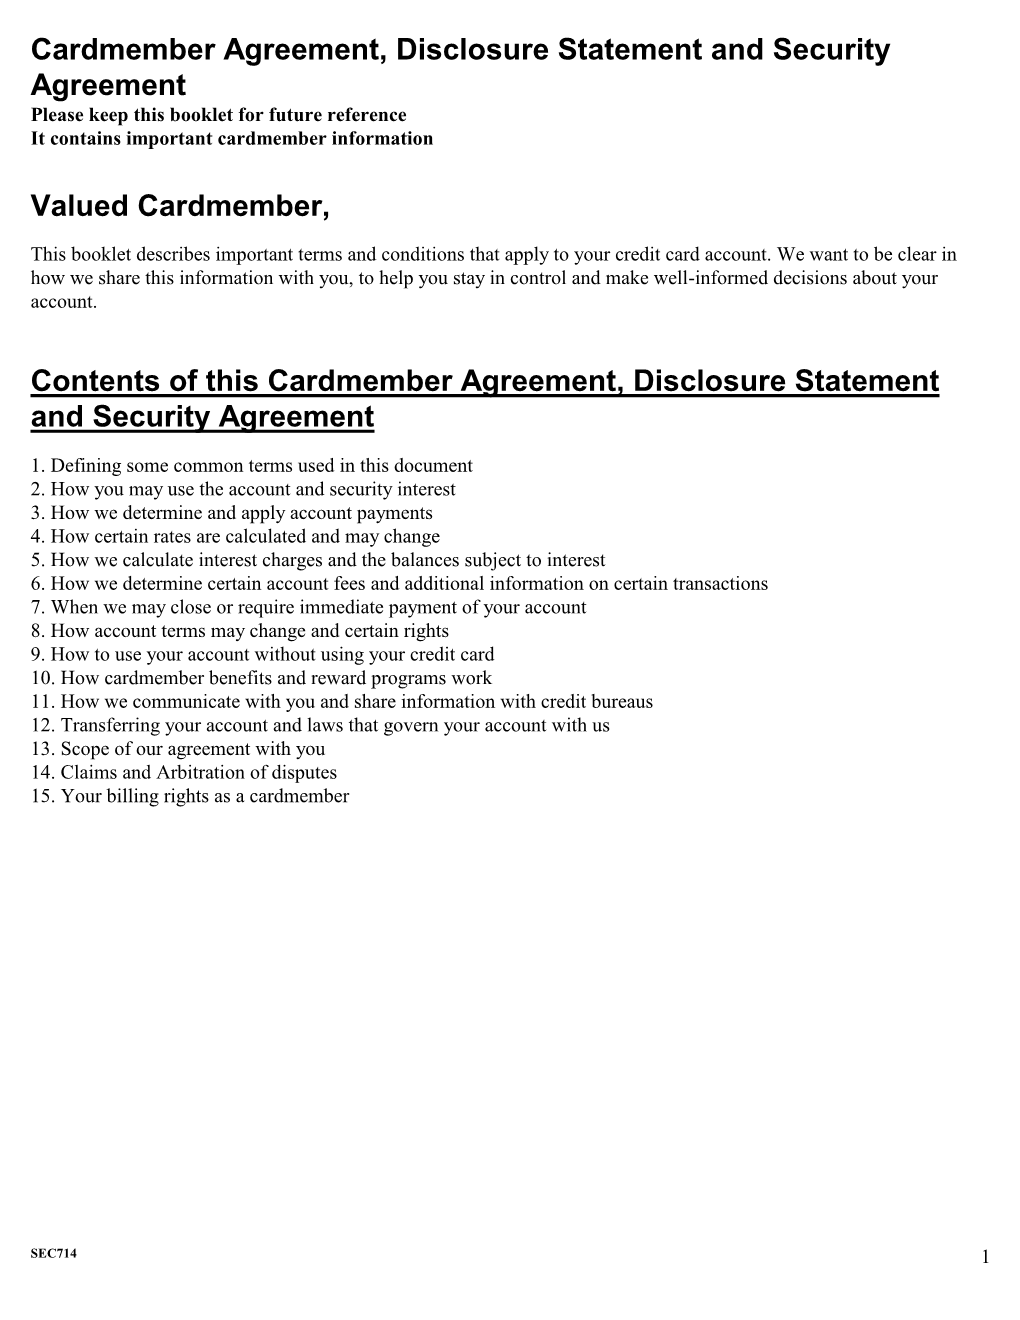 Cardmember Agreement, Disclosure Statement and Security Agreement Please Keep This Booklet for Future Reference It Contains Important Cardmember Information